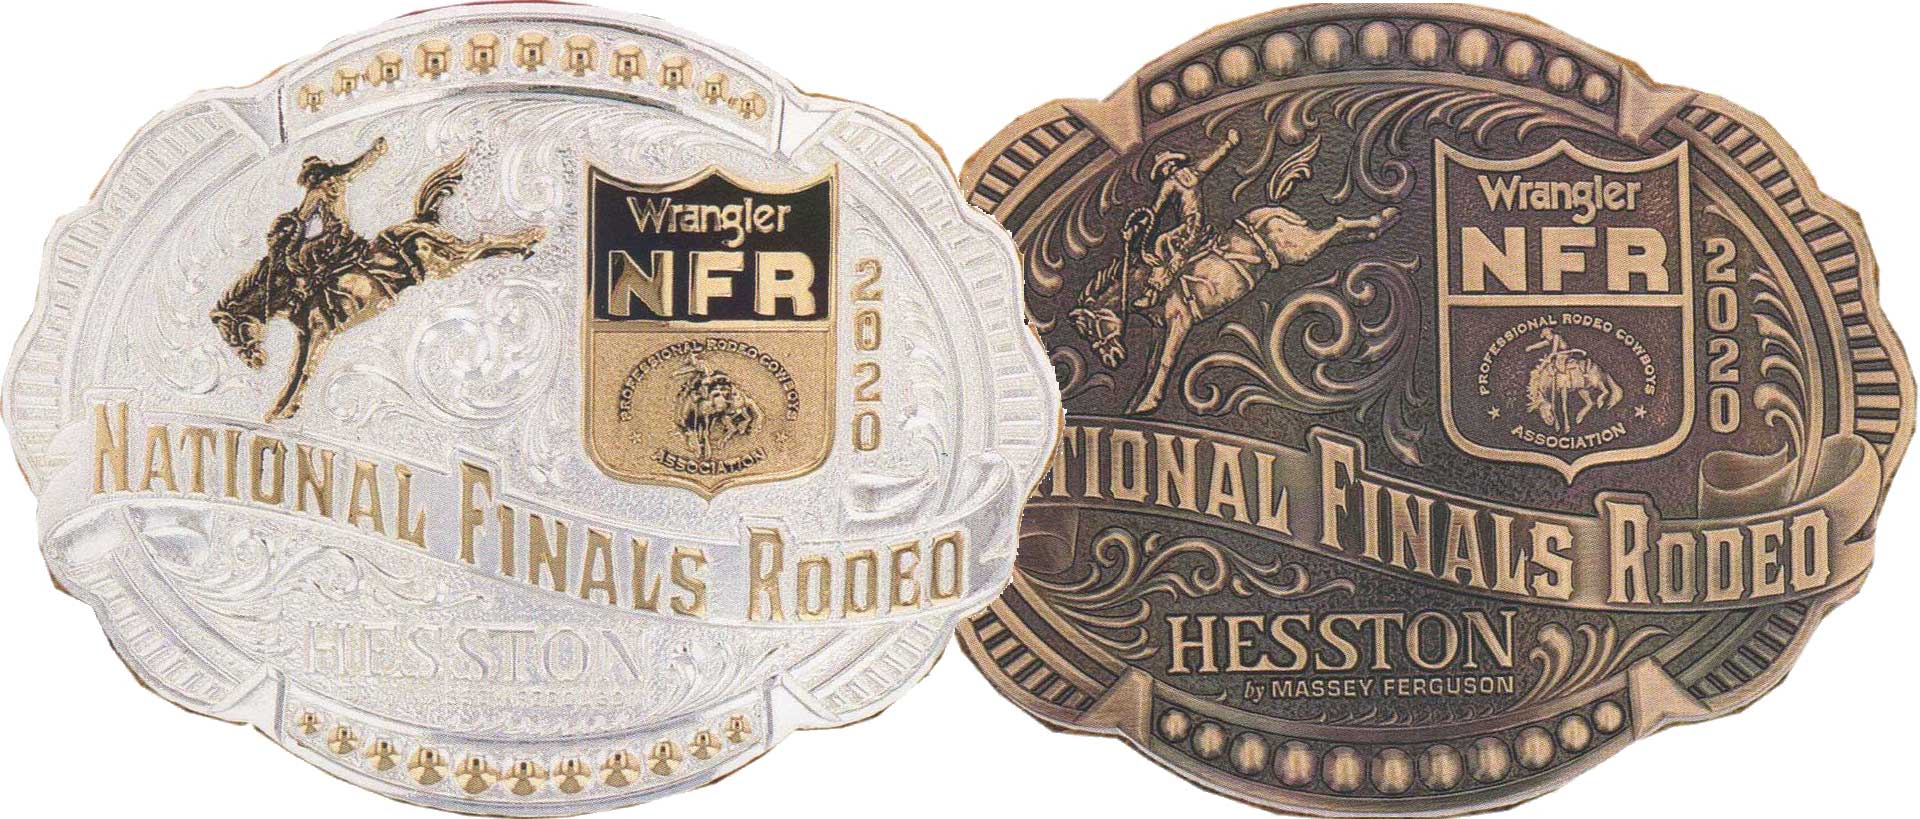 Small NFR Cowboy Buckle New AGCO PCRA Details about   National Finals Rodeo Hesston 2008 Youth 